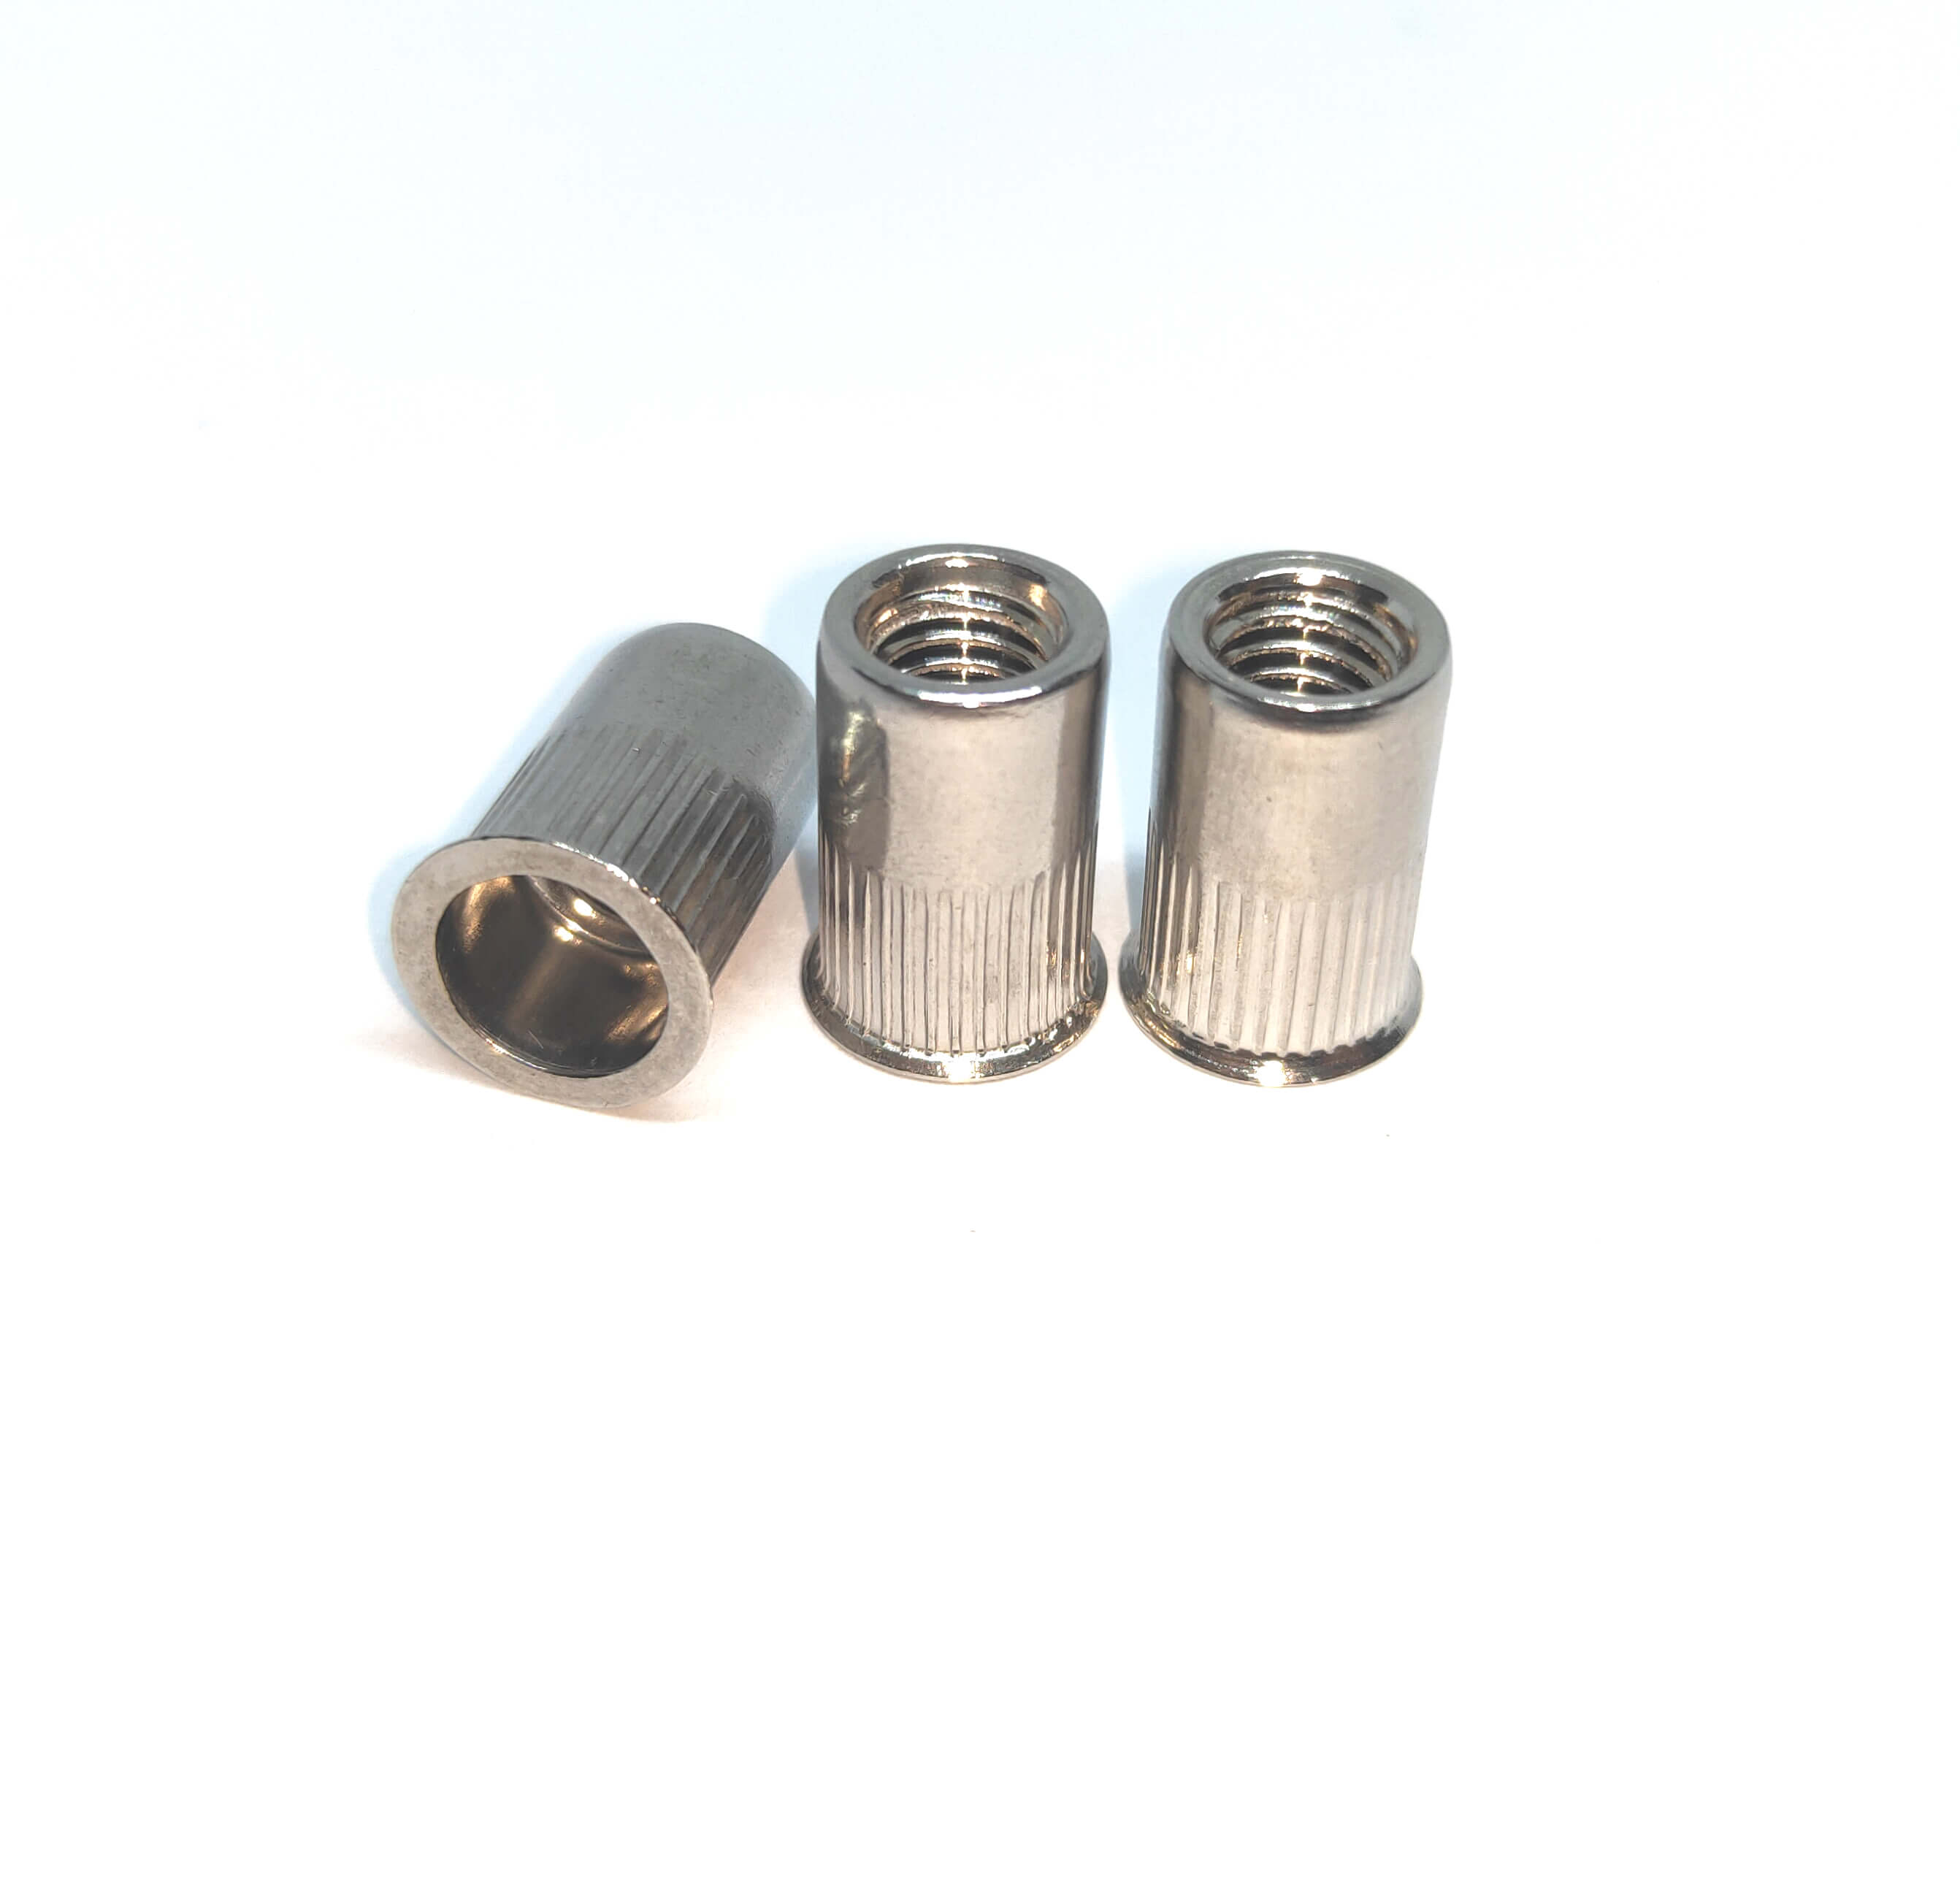 Small Head Round body Open End Rivet Nut